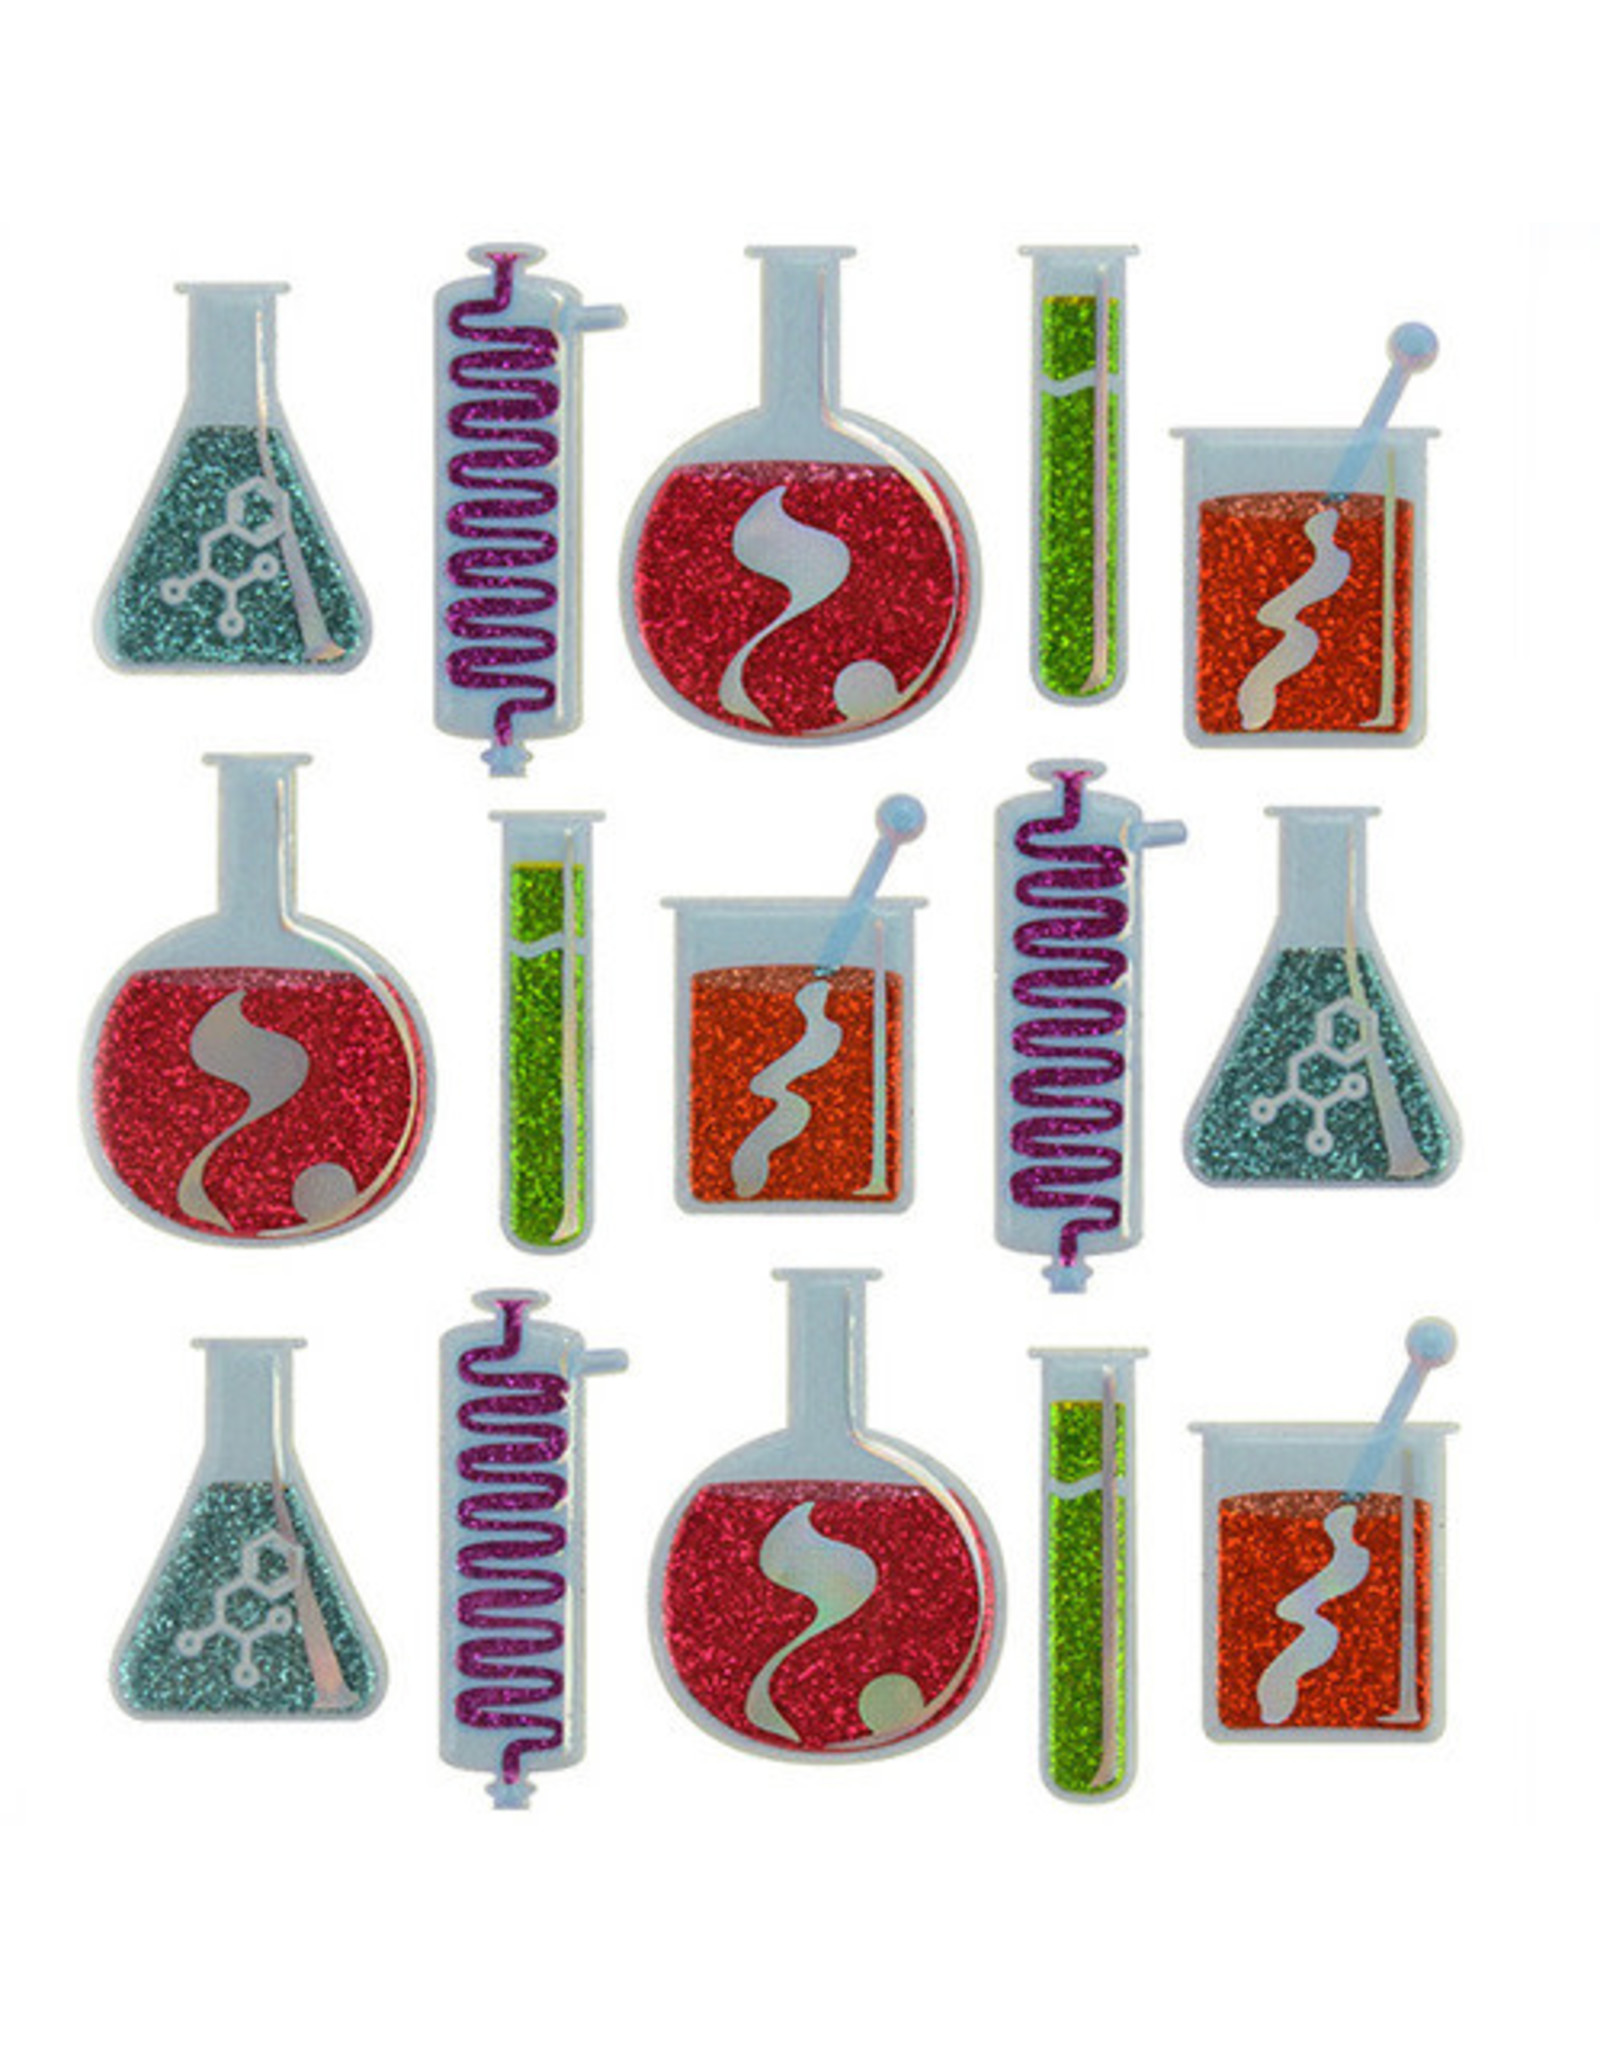 JOLEE’S JOLEE'S BOUTIQUE BEAKERS AND TEST TUBE REPEAT STICKERS